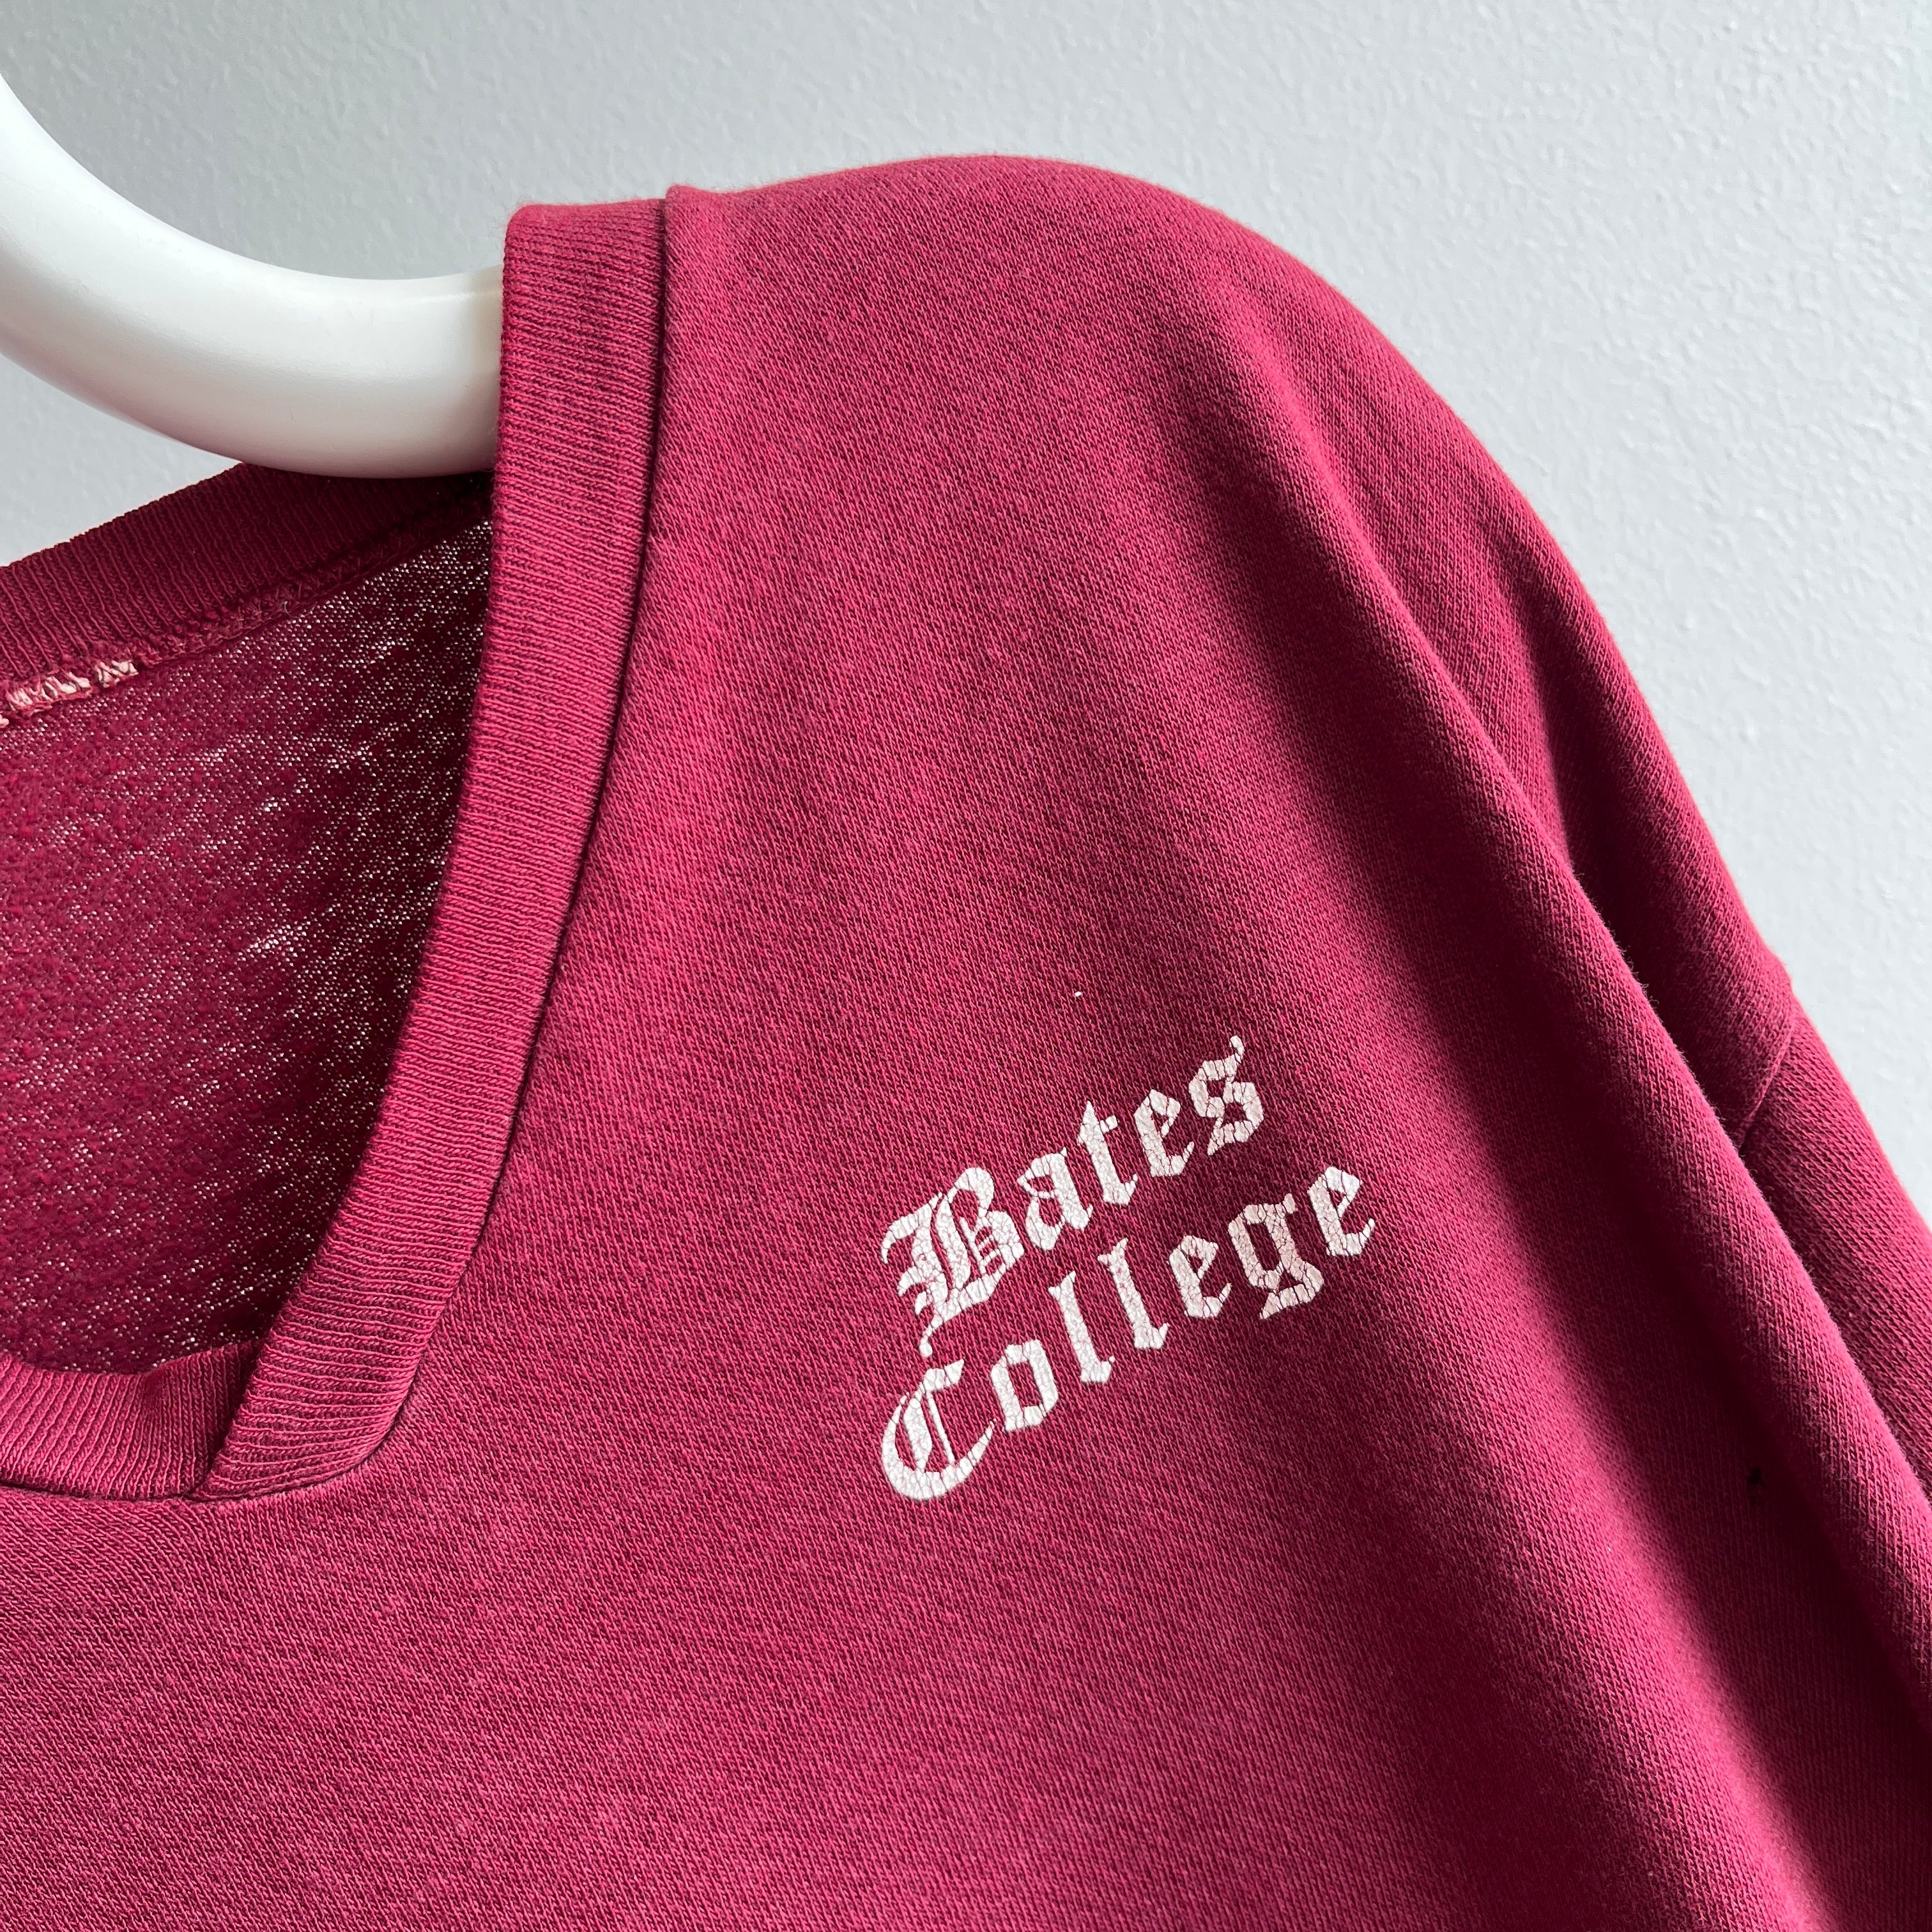 1970s Bates College Thin, Sunfaded, and Beat Up V-Neck Sweatshirt